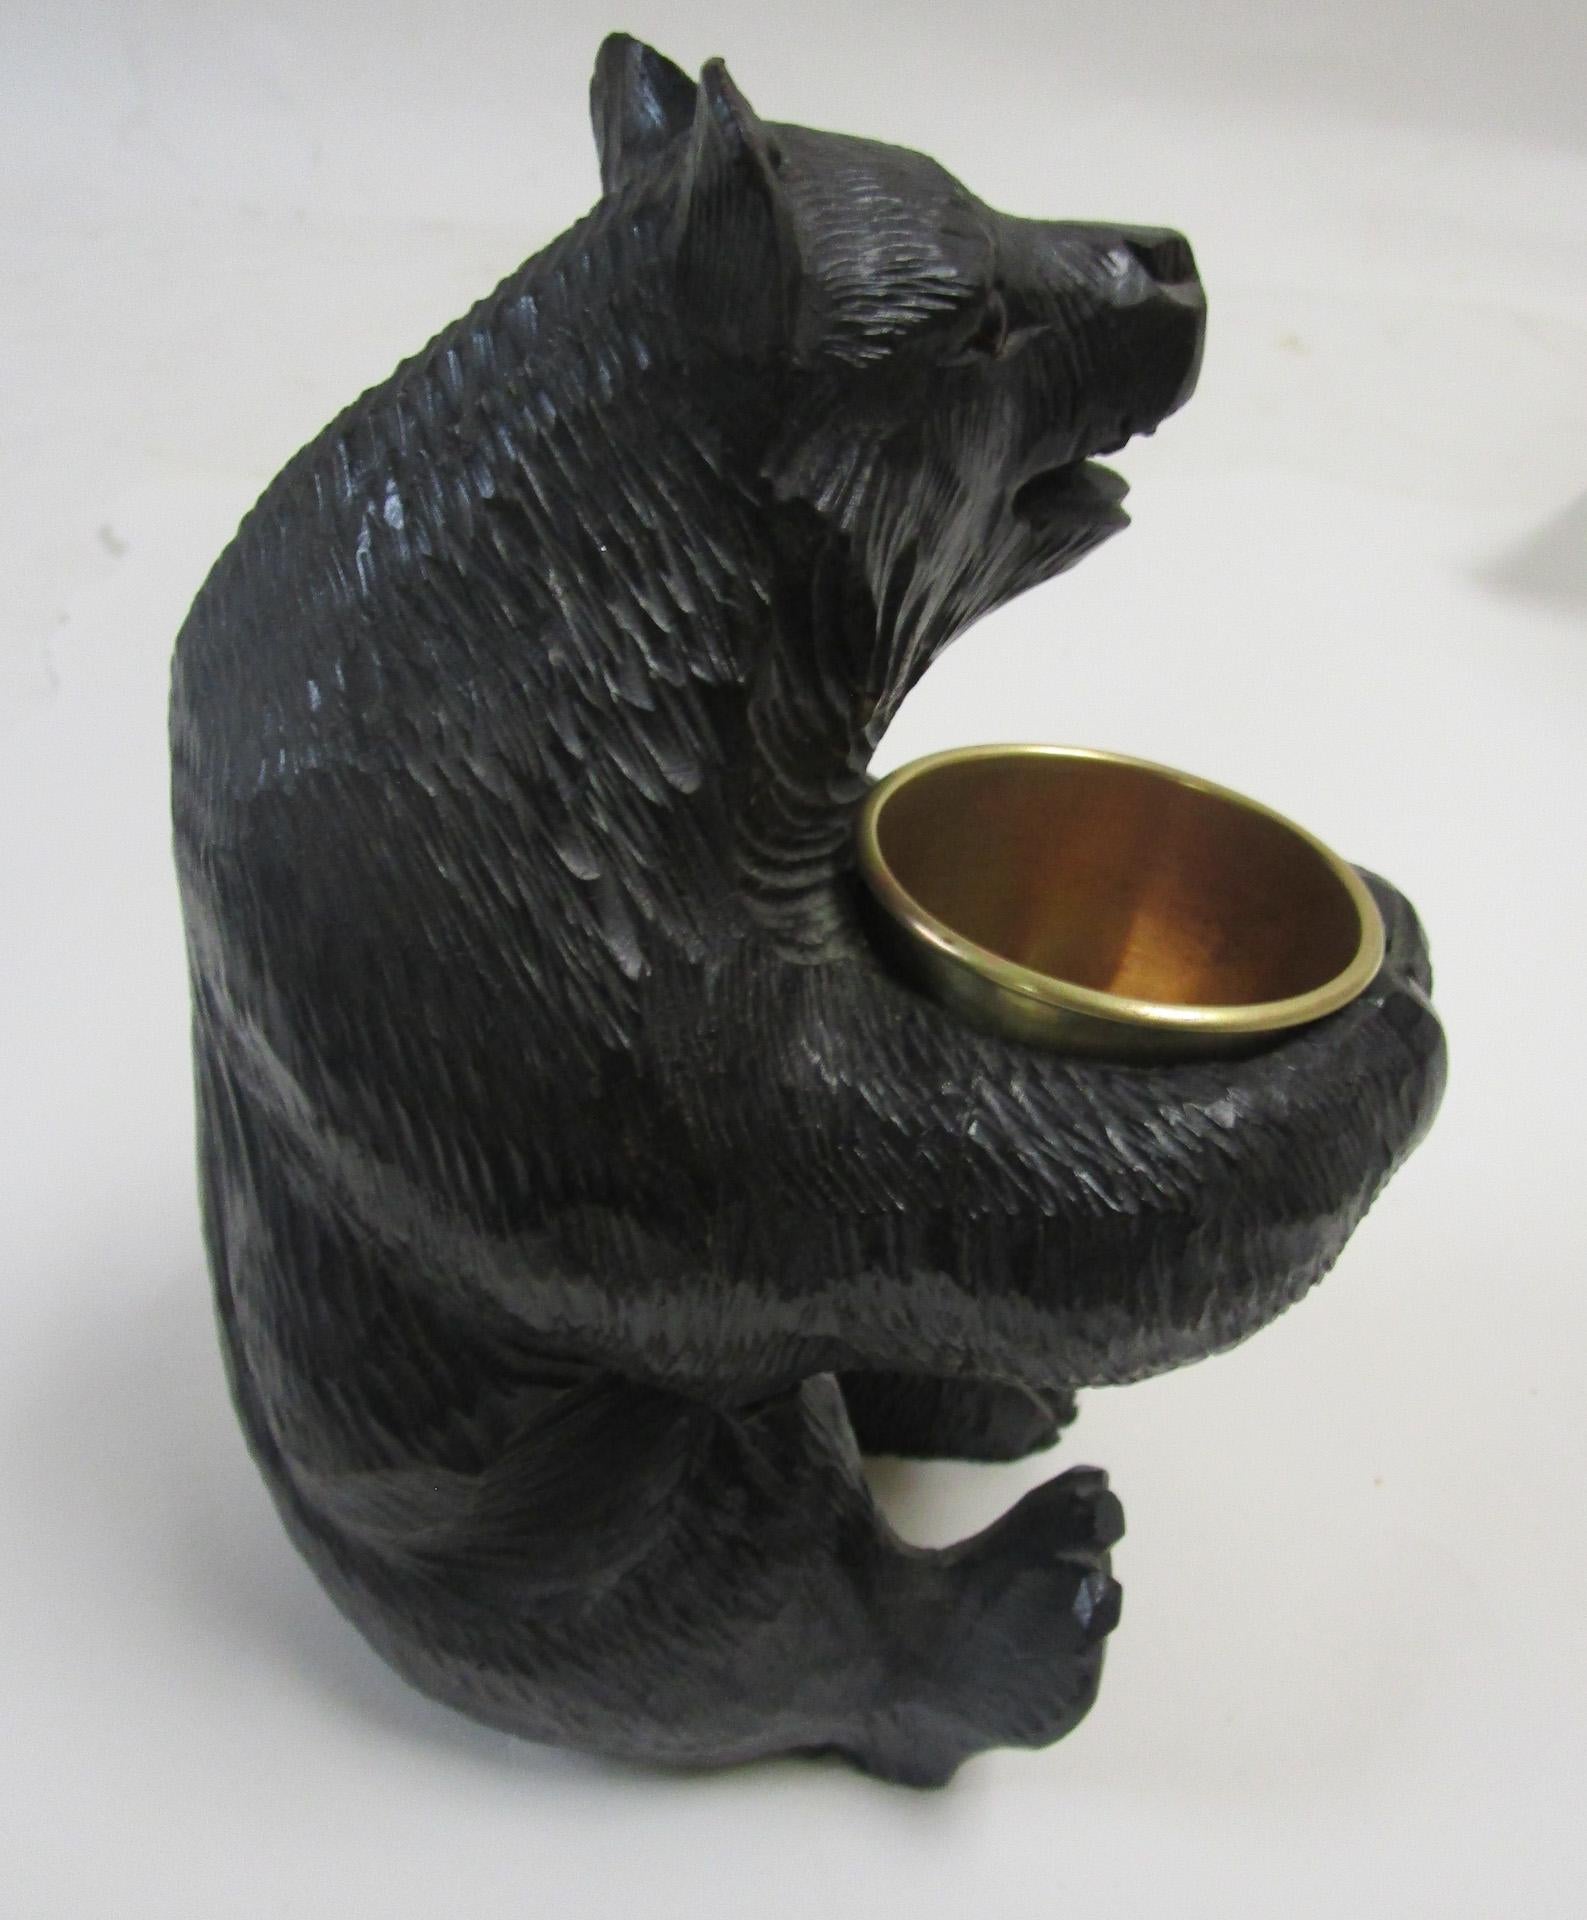 This whimsical hand carved seated wooden brown bear holds a brass cup suitable for cigarettes, matches or even a small bouquet of flowers. Very detailed carving with tiny teeth and a red painted tongue. Inserted glass eyes. A very charming fellow.